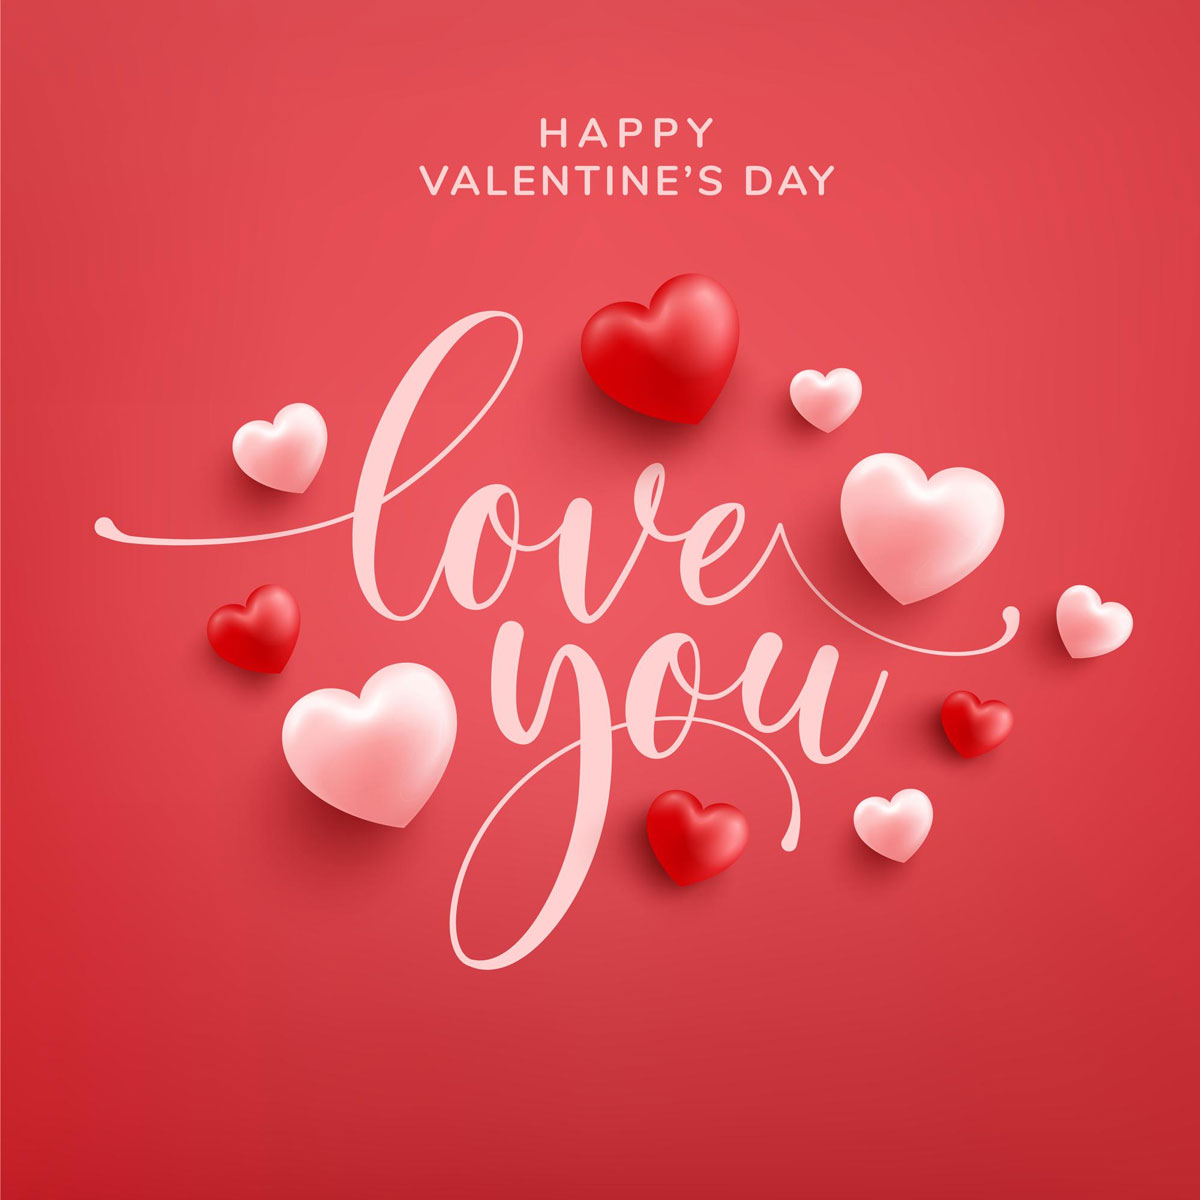 Happy Valentine’s Day 2023: Wishes, Quotes & Messages You Can Send On